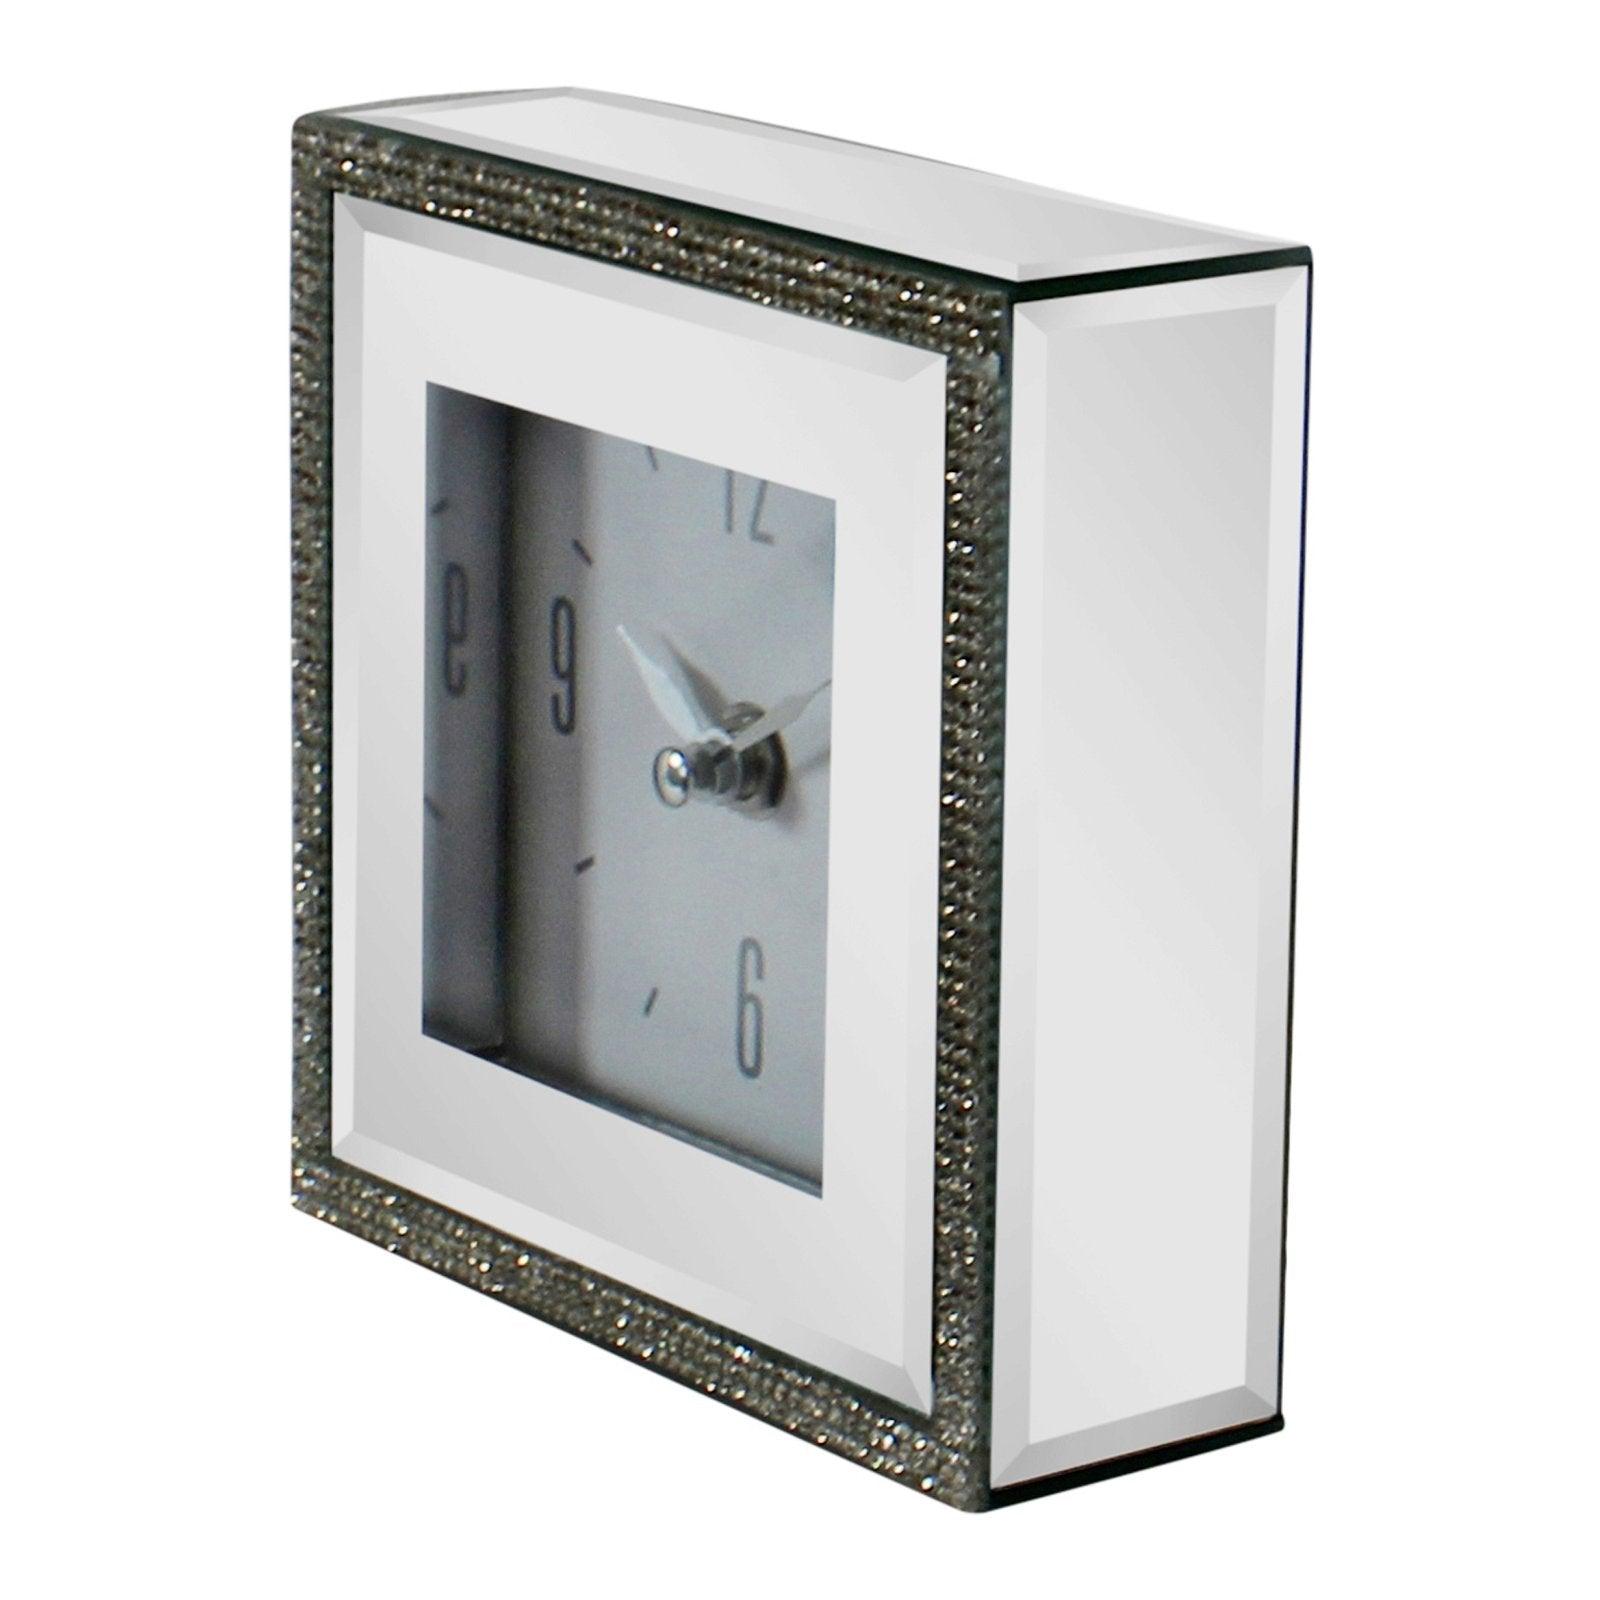 Small Freestanding Mirrored and Jewelled Table Clock - £26.99 - Freestanding Clocks 